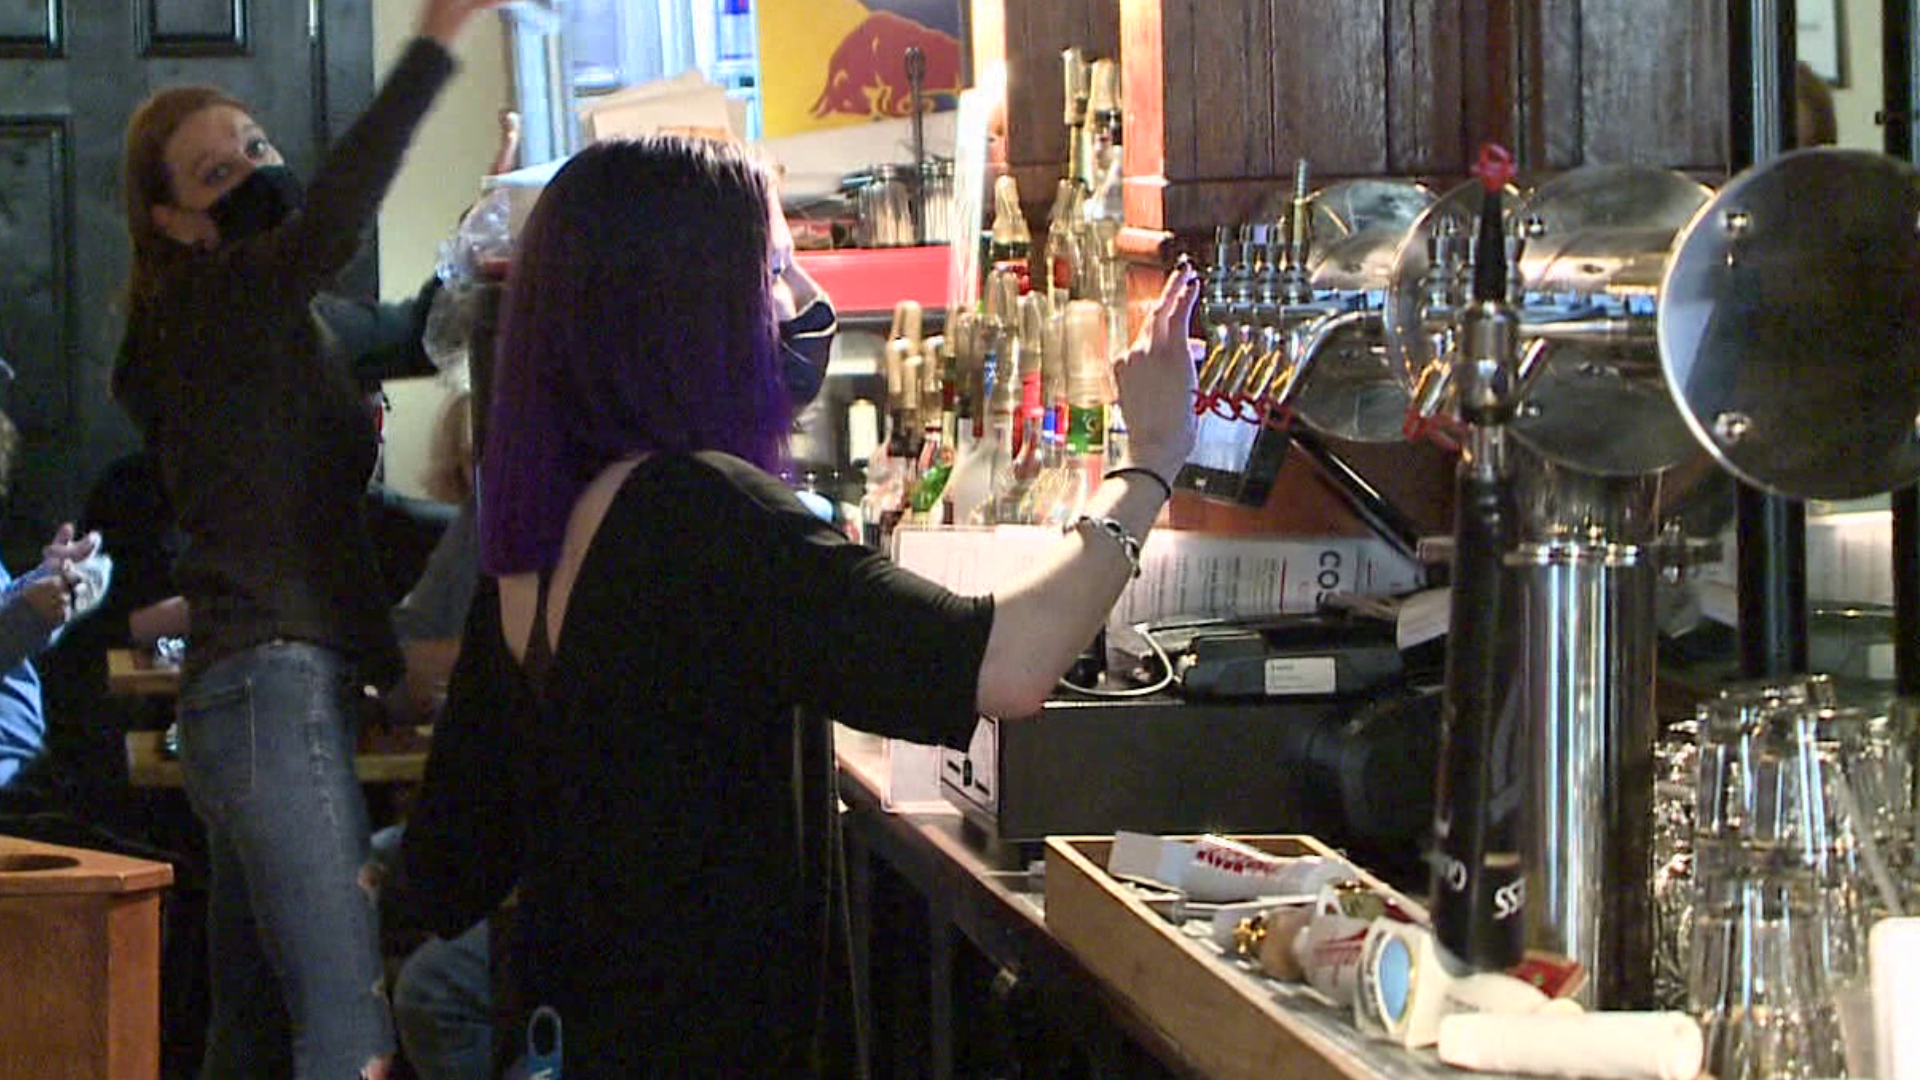 WNEP went back to restaurants that were struggling in the spring to see if hiring has picked up.